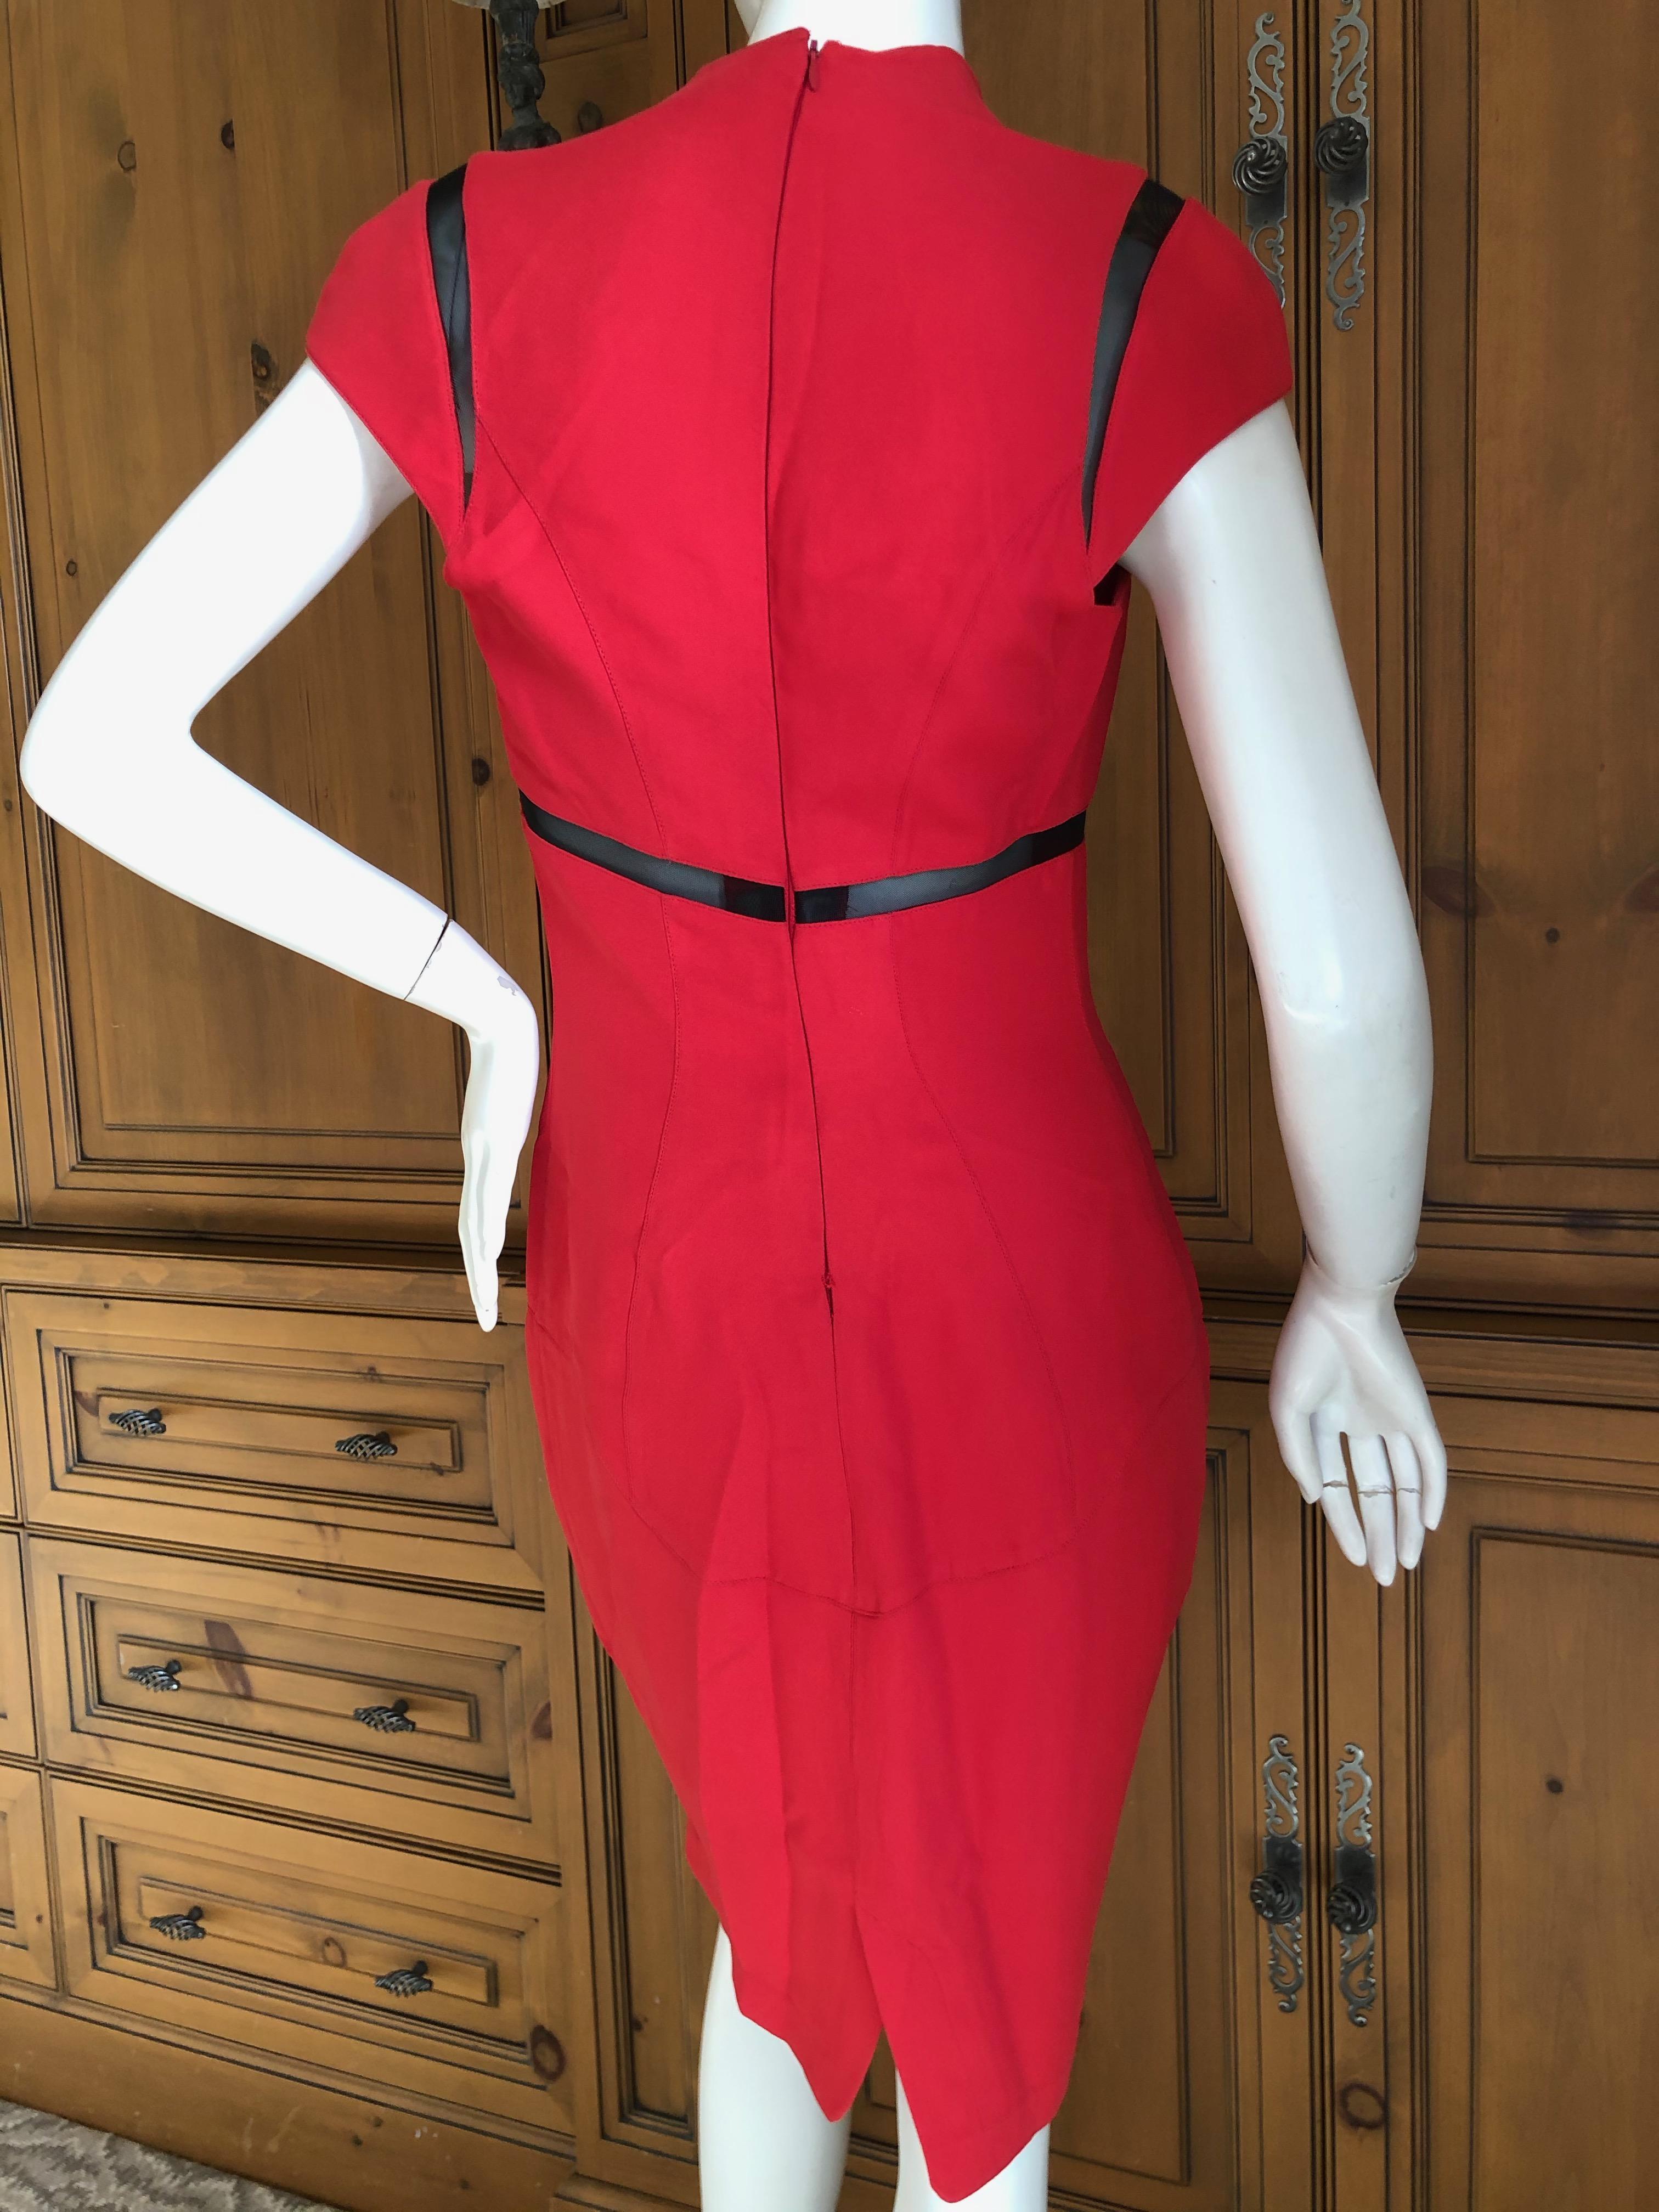 Thierry Mugler Vintage 1980's Red Cocktail Dress with Sheer Inserts For Sale 4